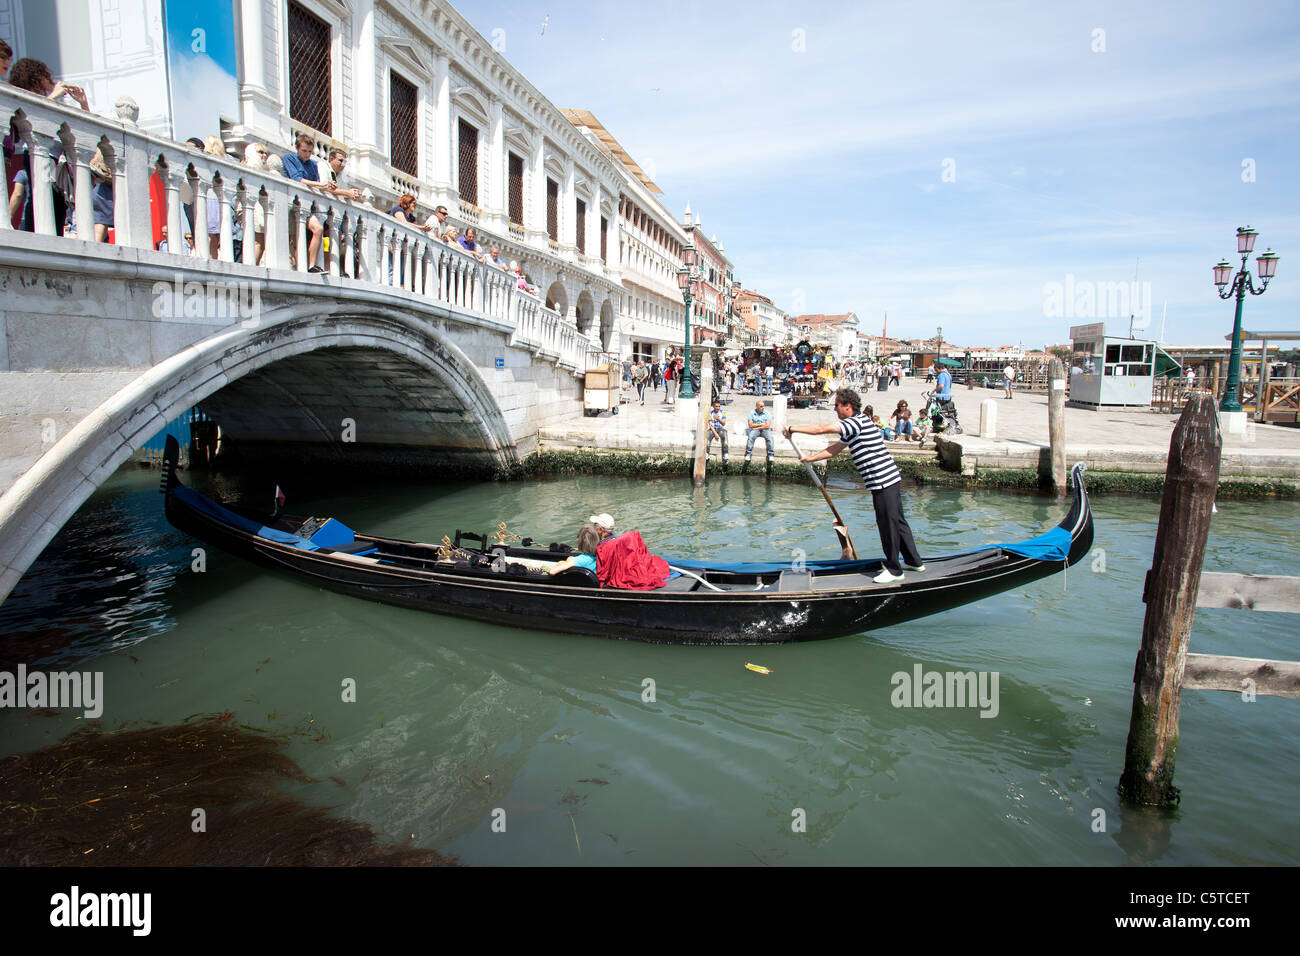 Venice Italy Grand Canal and famous Rialto Bridge. Gondolas going underneath and  tourists on bridge. Restaurants and businesses Stock Photo